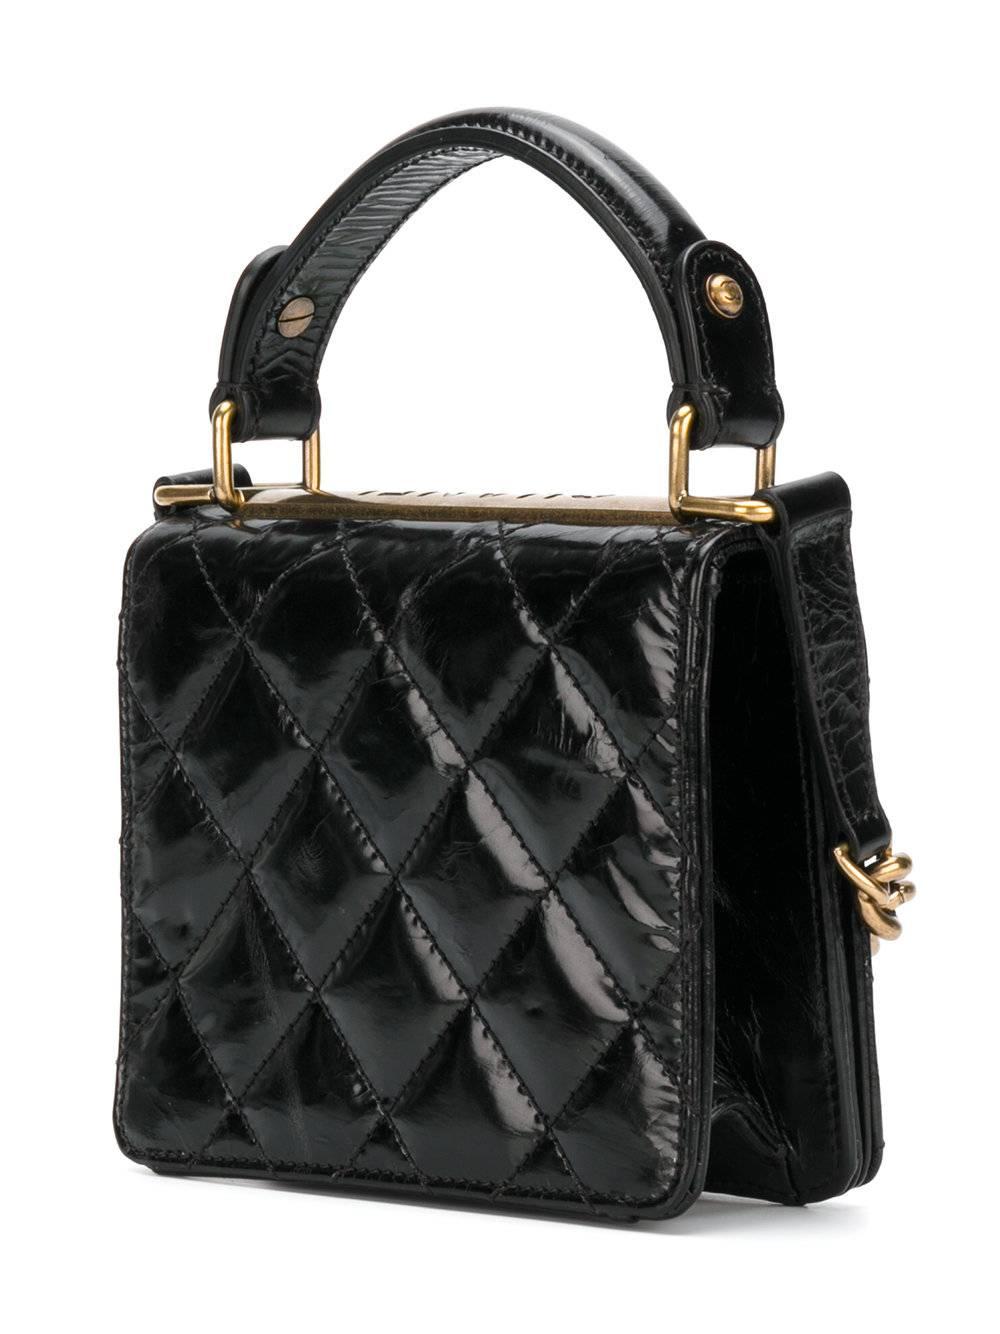 Cute and classic, this Chanel Vintage mini shoulder bag in quilted black lambskin features a chain and leather strap. This bag is accented with gold-tone hardware, a top handle and a foldover top which secures with a logo engraved twist lock